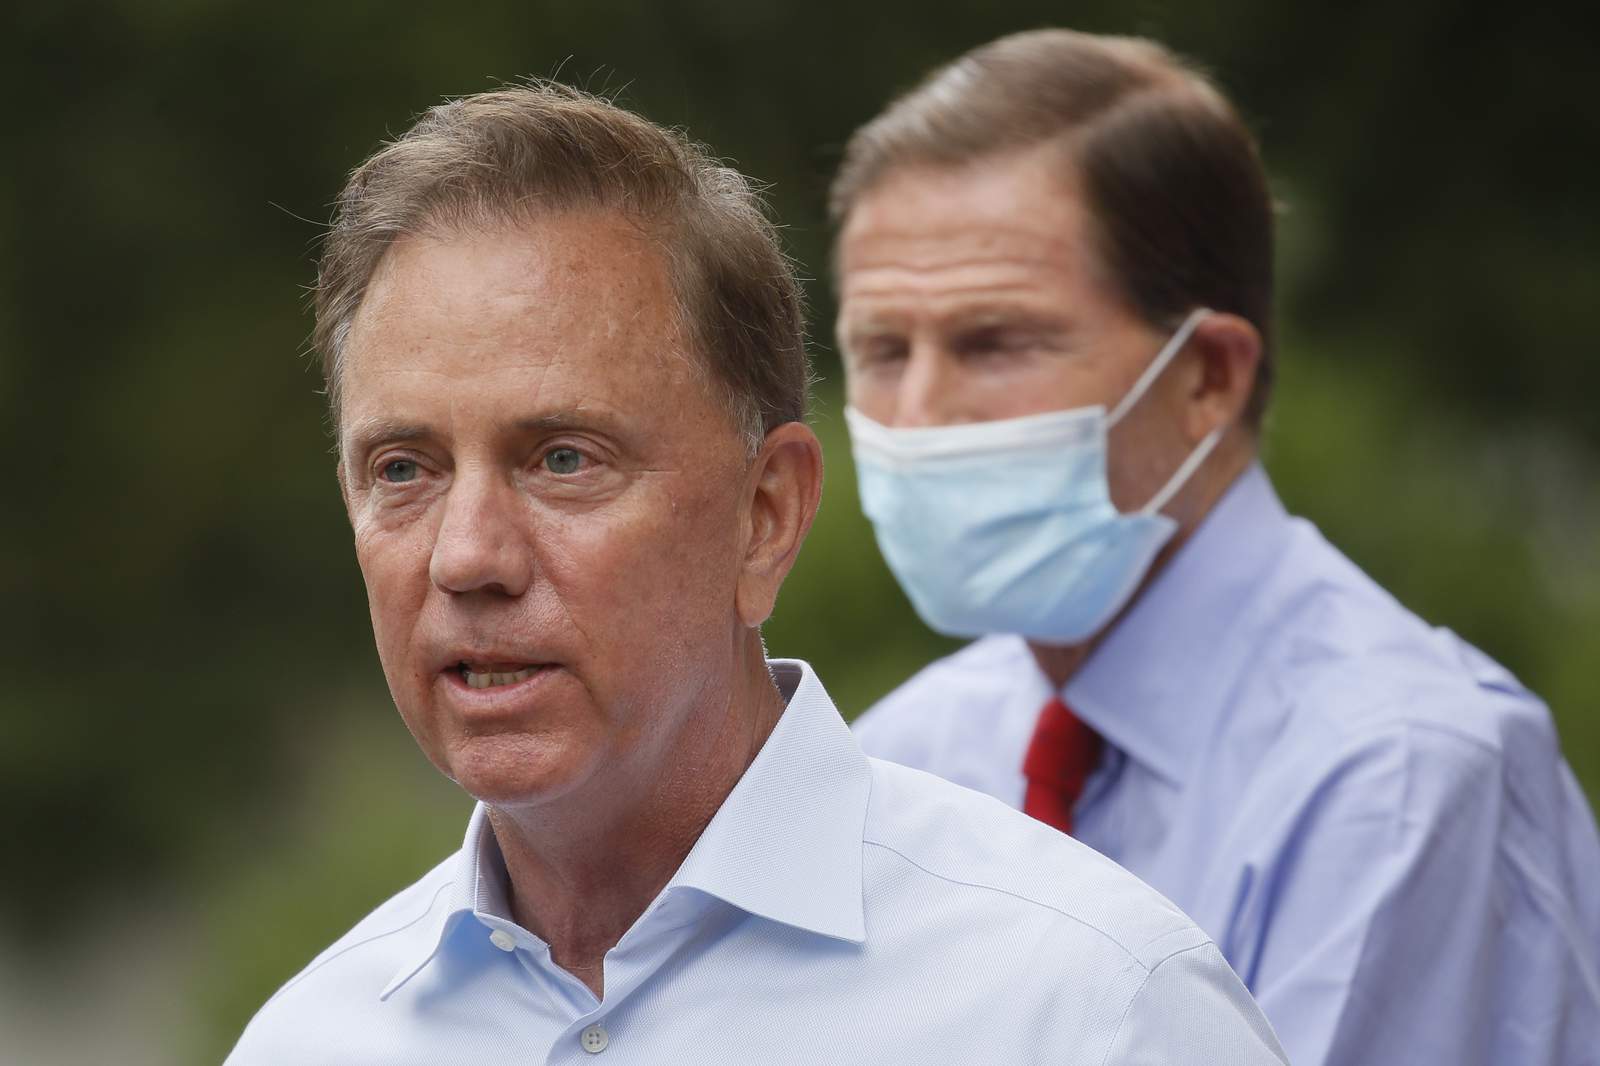 The Latest: Connecticut governor is self-quarantining